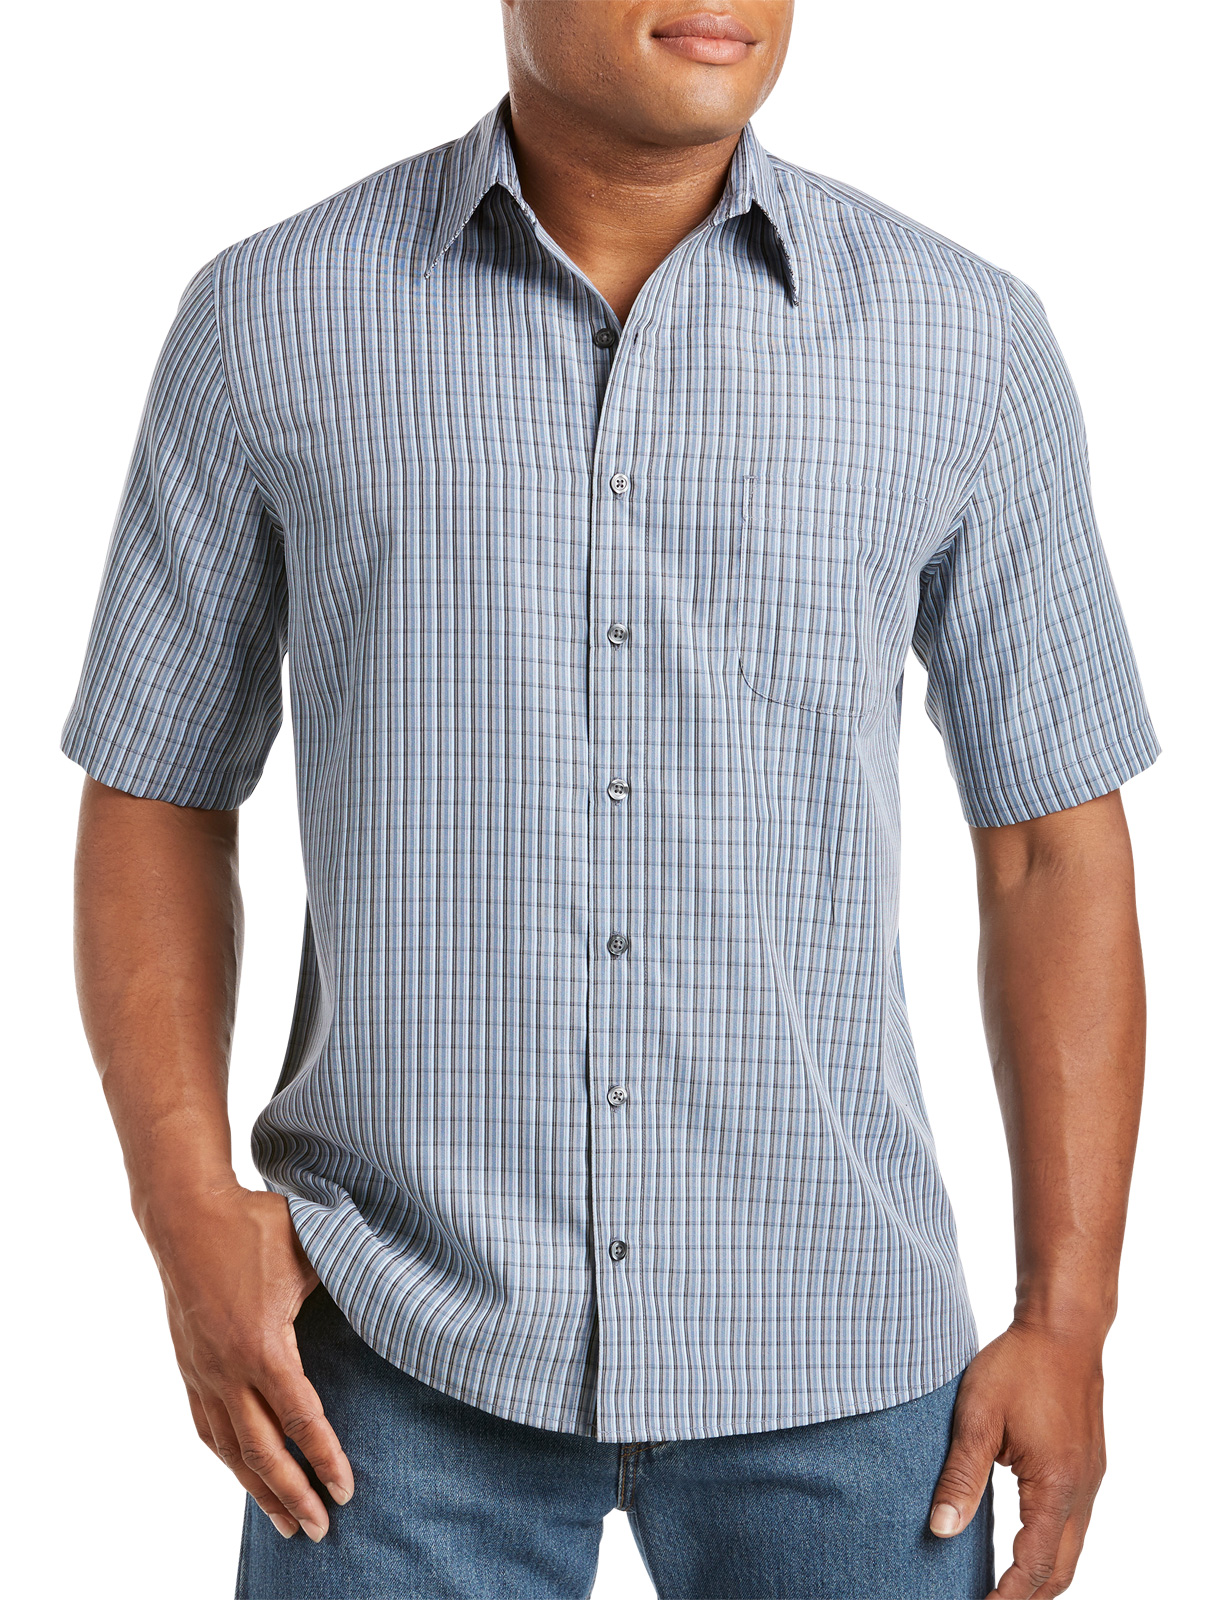 Synrgy Men's Big and Tall Microfiber Plaid Sport Shirt